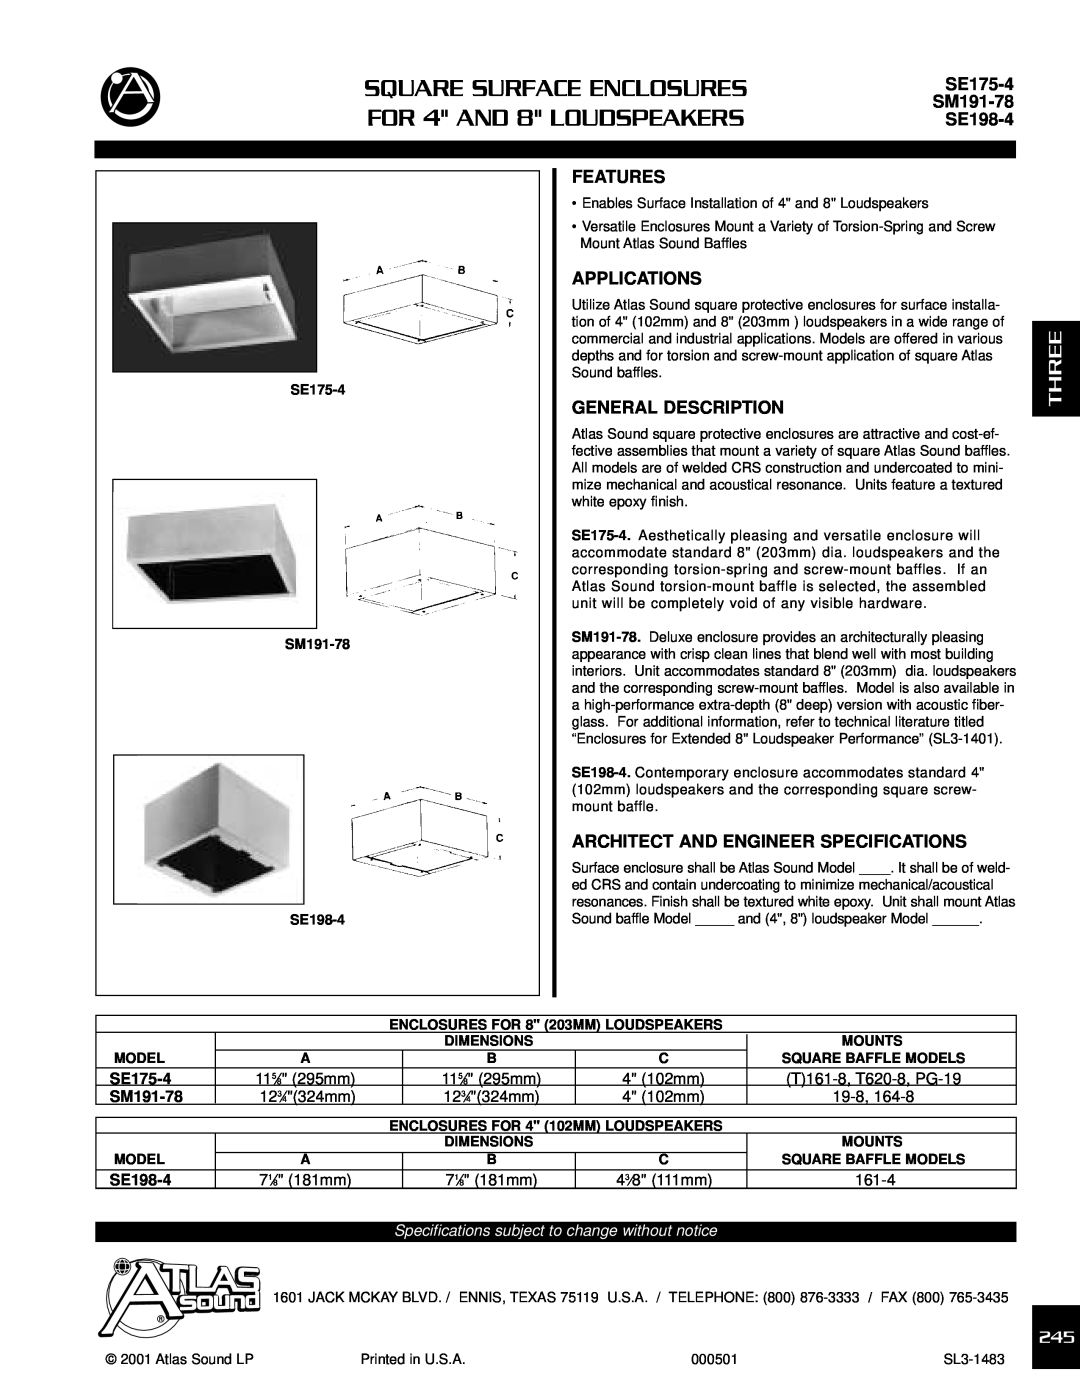 Atlas Sound SM191-78 specifications FOR 4 AND 8 LOUDSPEAKERS, Three, Square Surface Enclosures, SE175-4, SE198-4, Features 